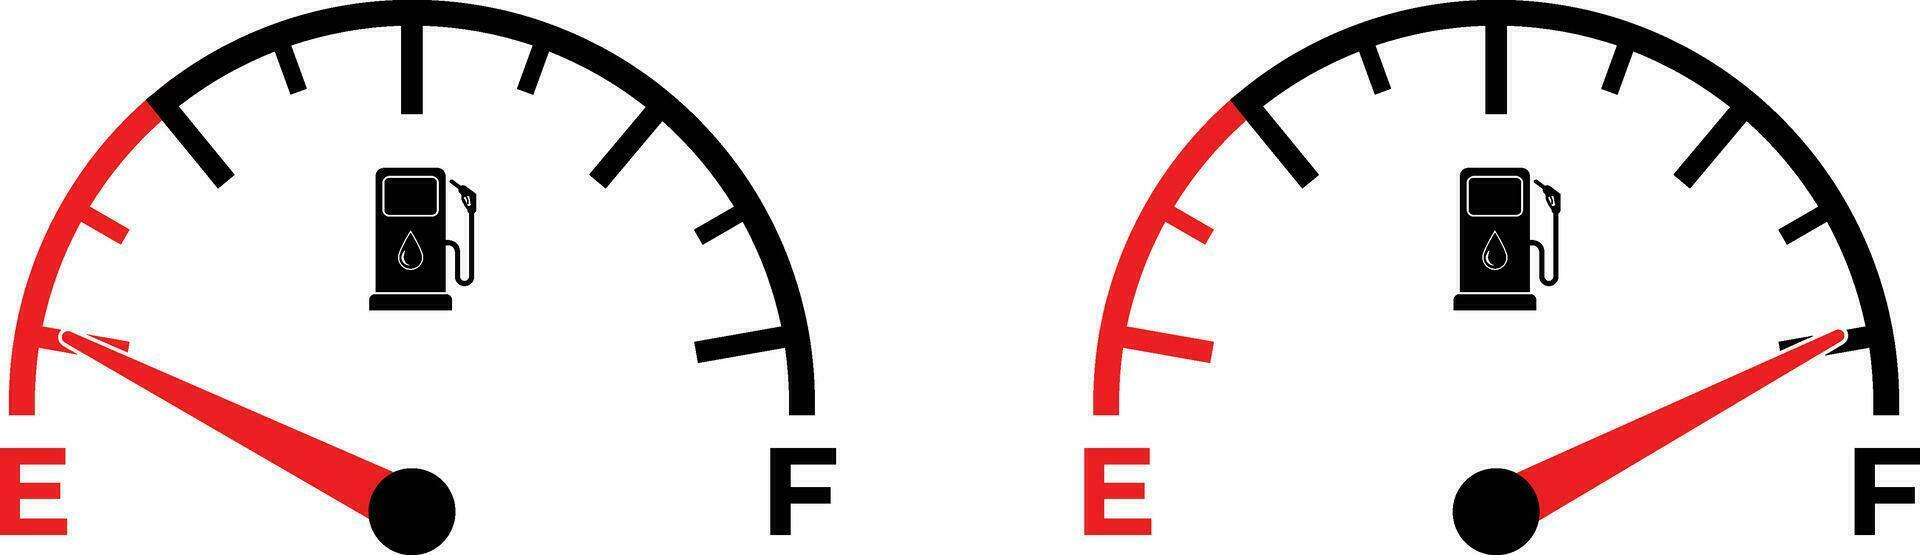 Empty and Full Fuel Gauge, Gas Pump Icon vector